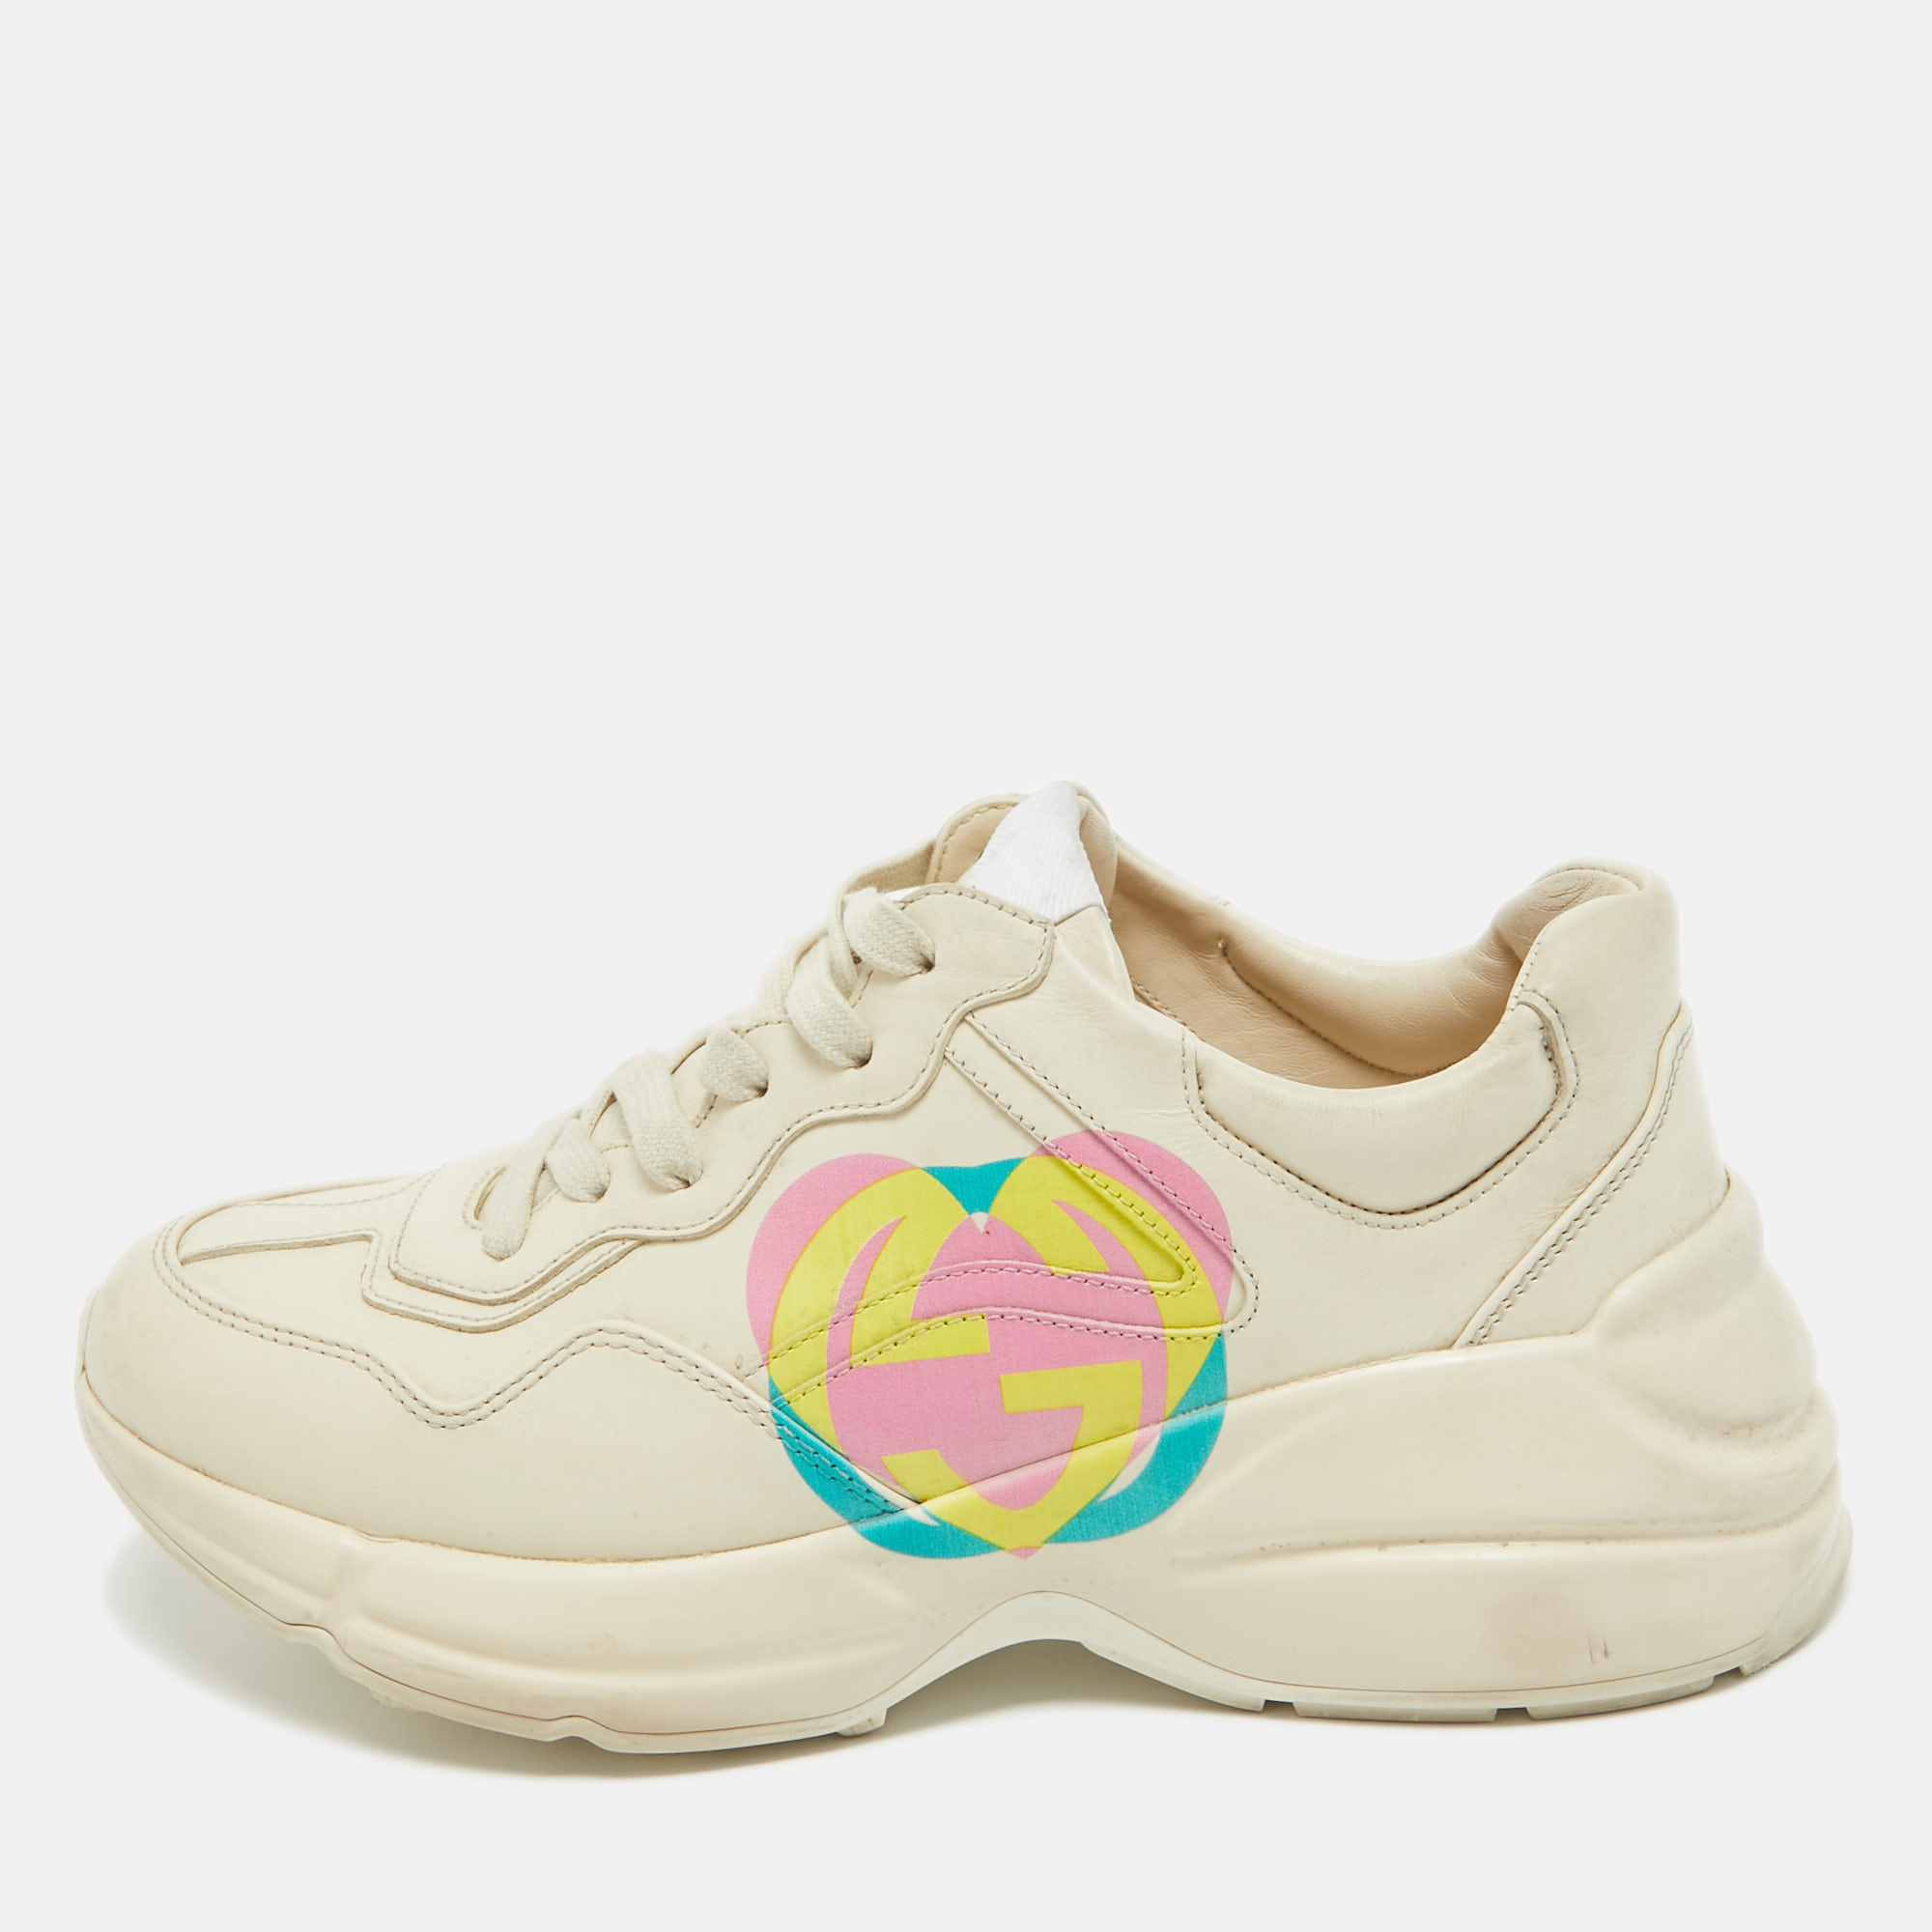 Gucci cream leather gg heart rhyton sneakers size 38